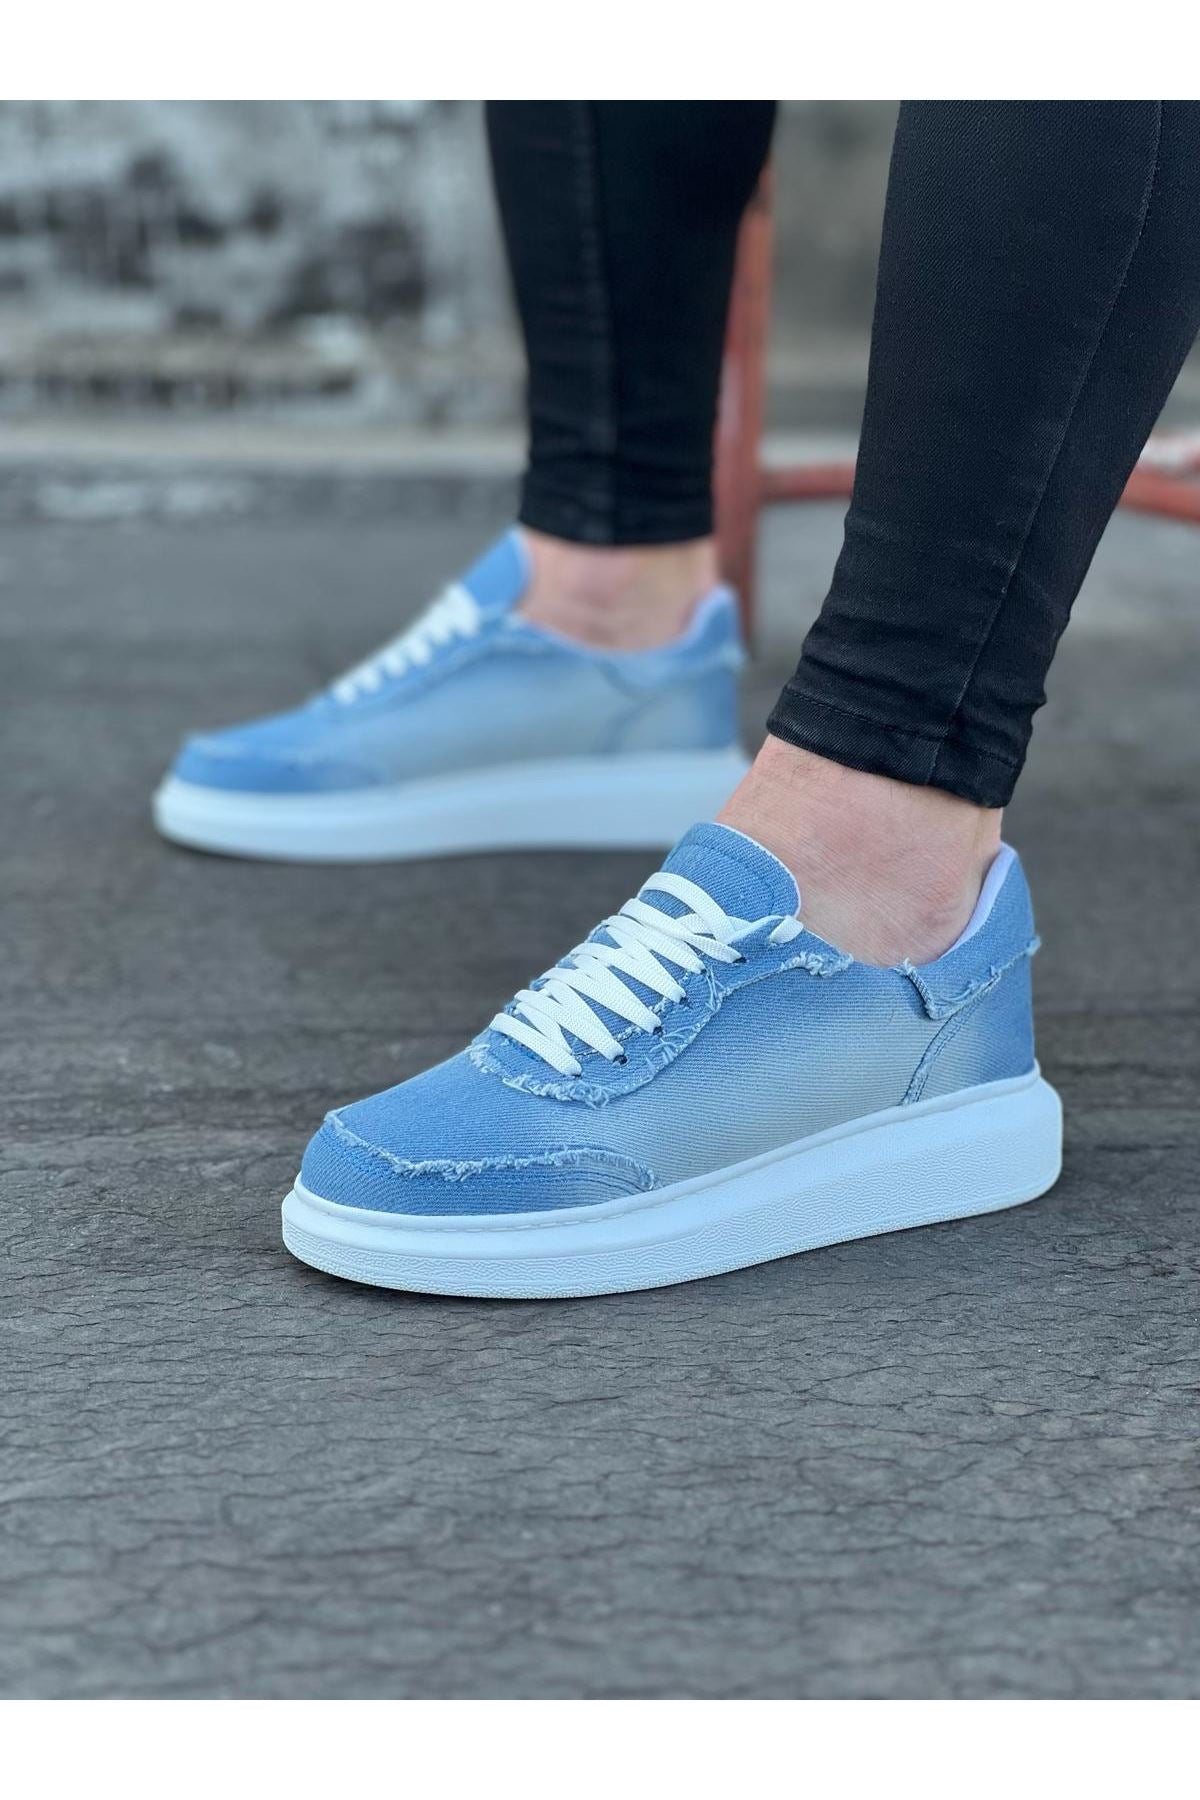 WG018 Ice Blue Men's Casual Shoes - STREETMODE™